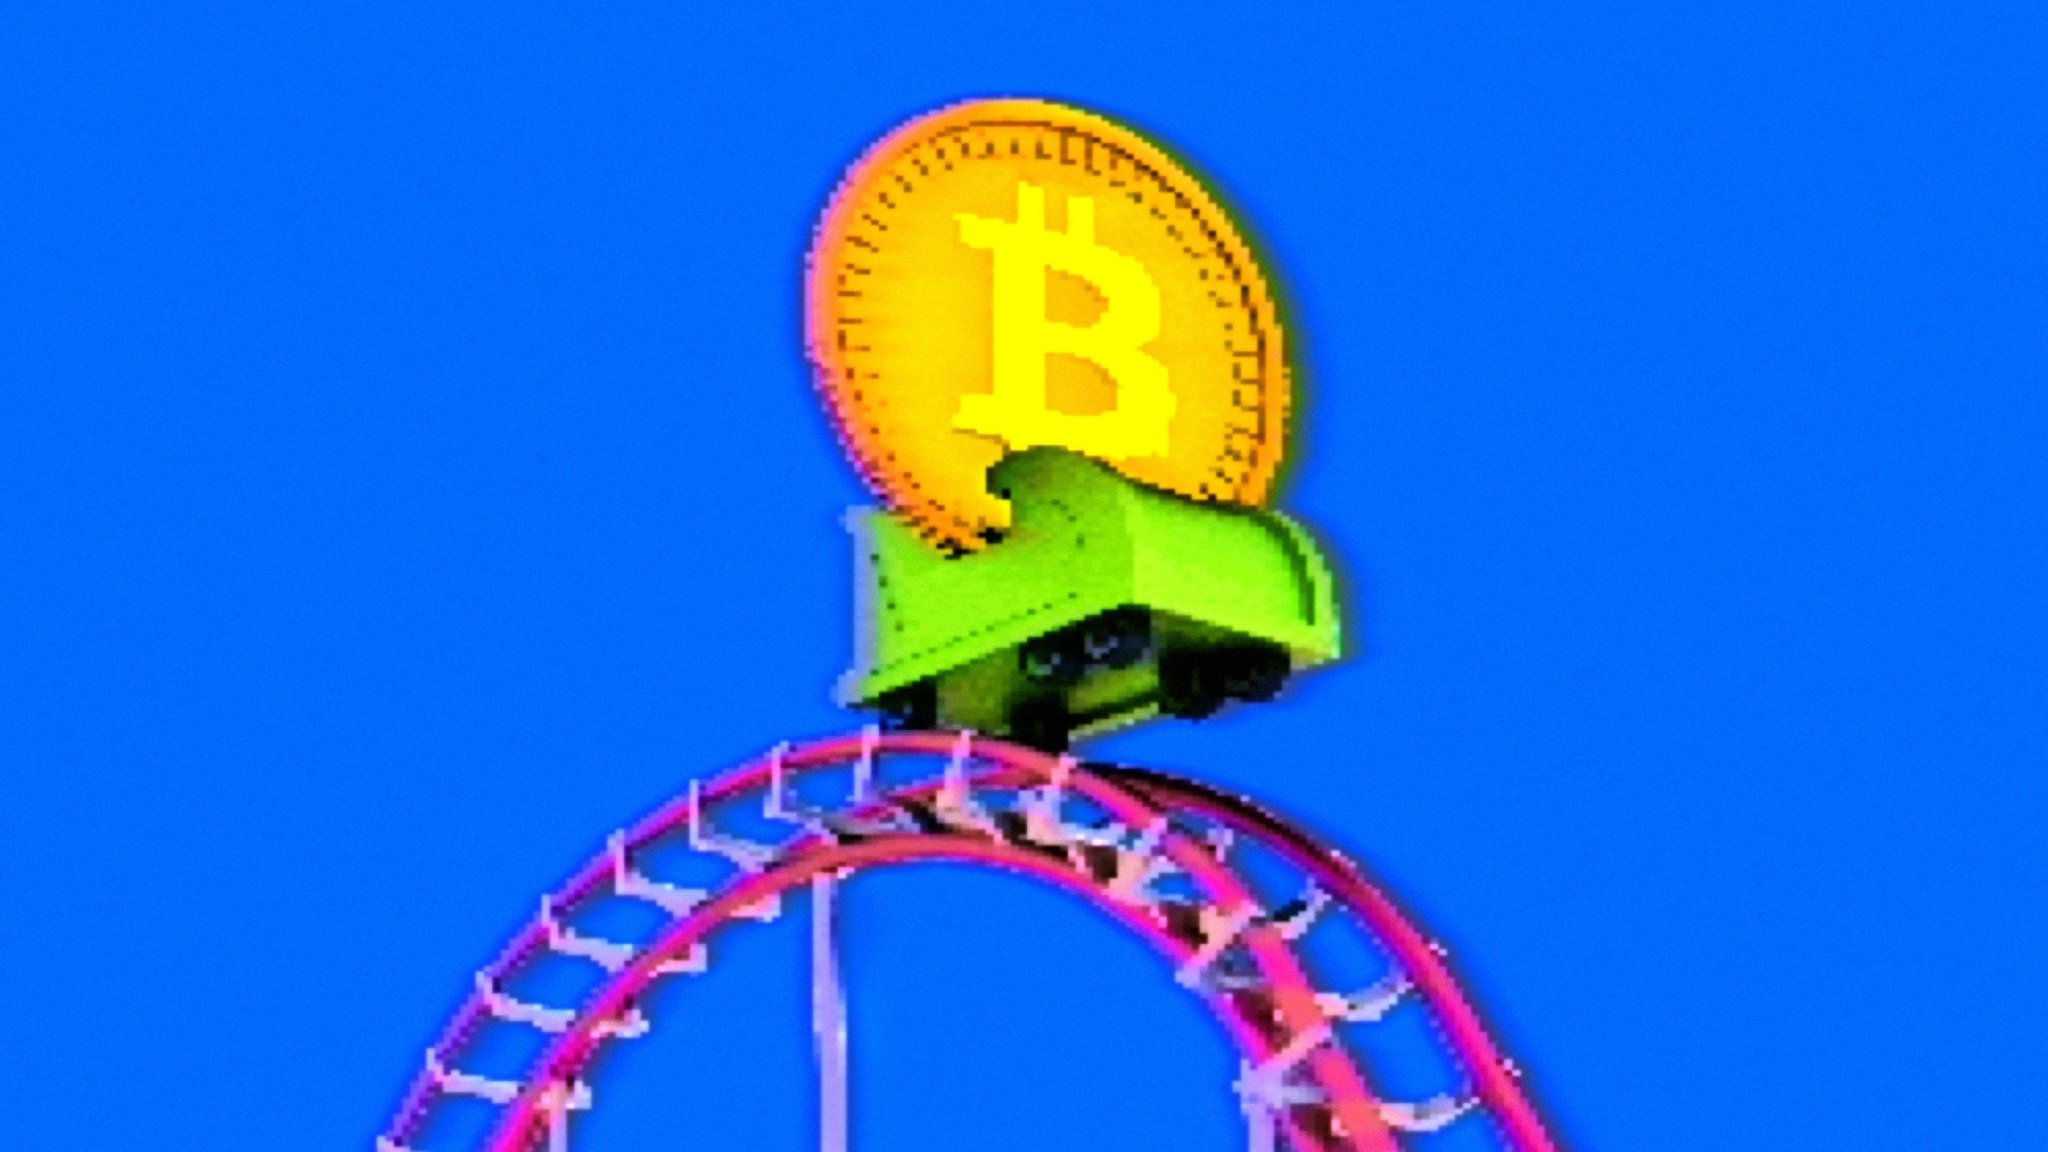 Bitcoin investment simulator: Can you beat the market?